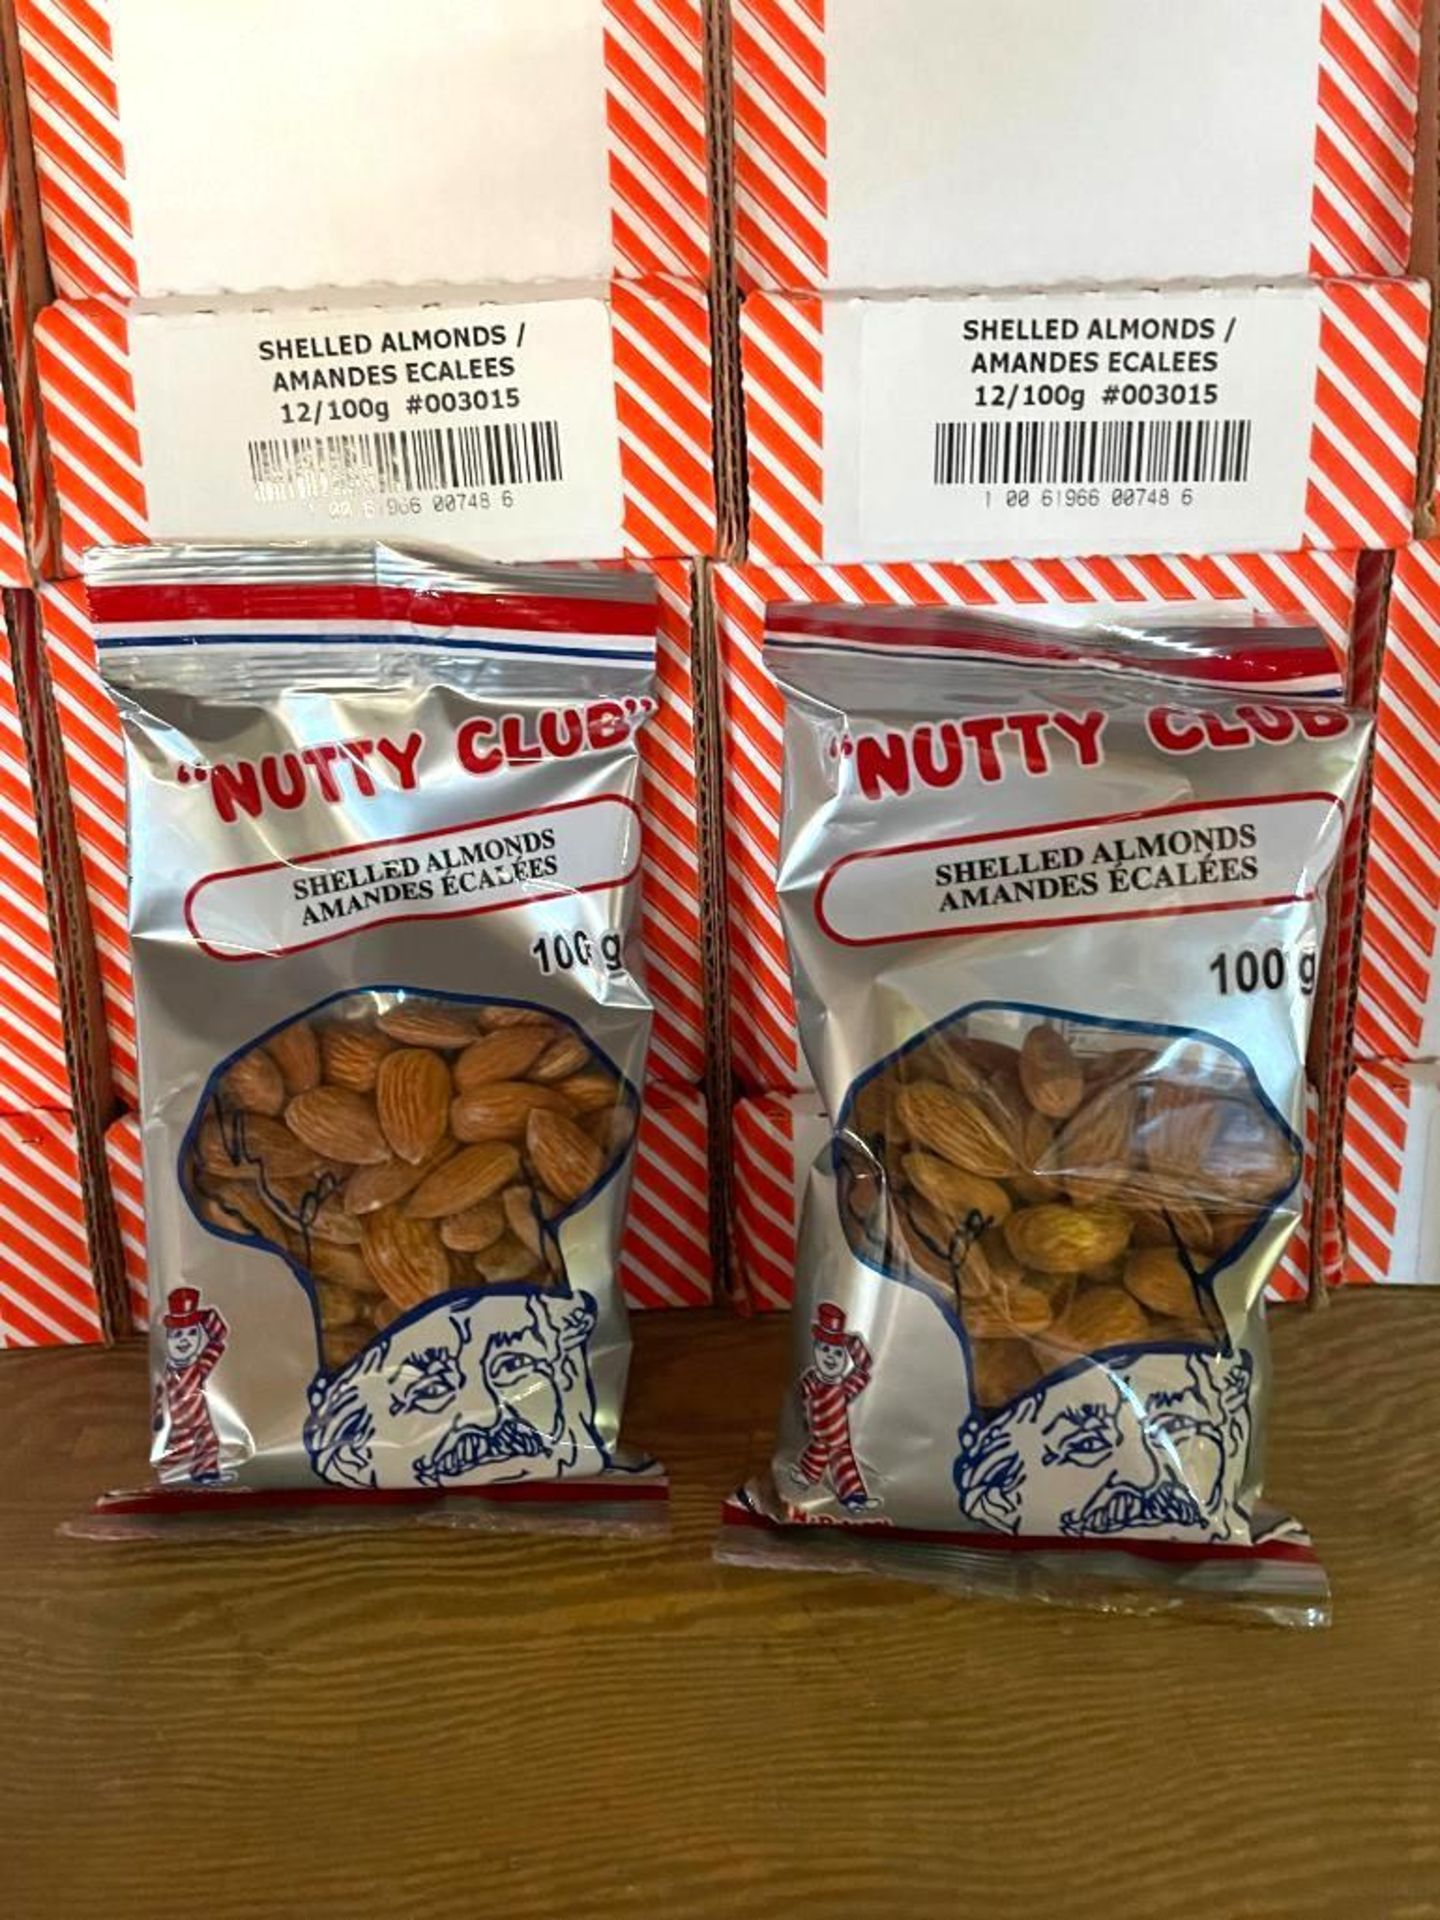 (11) BOXES OF NUTTY CLUB SHELLED ALMONDS, 12/100G BAGS PER BOX - Image 2 of 3